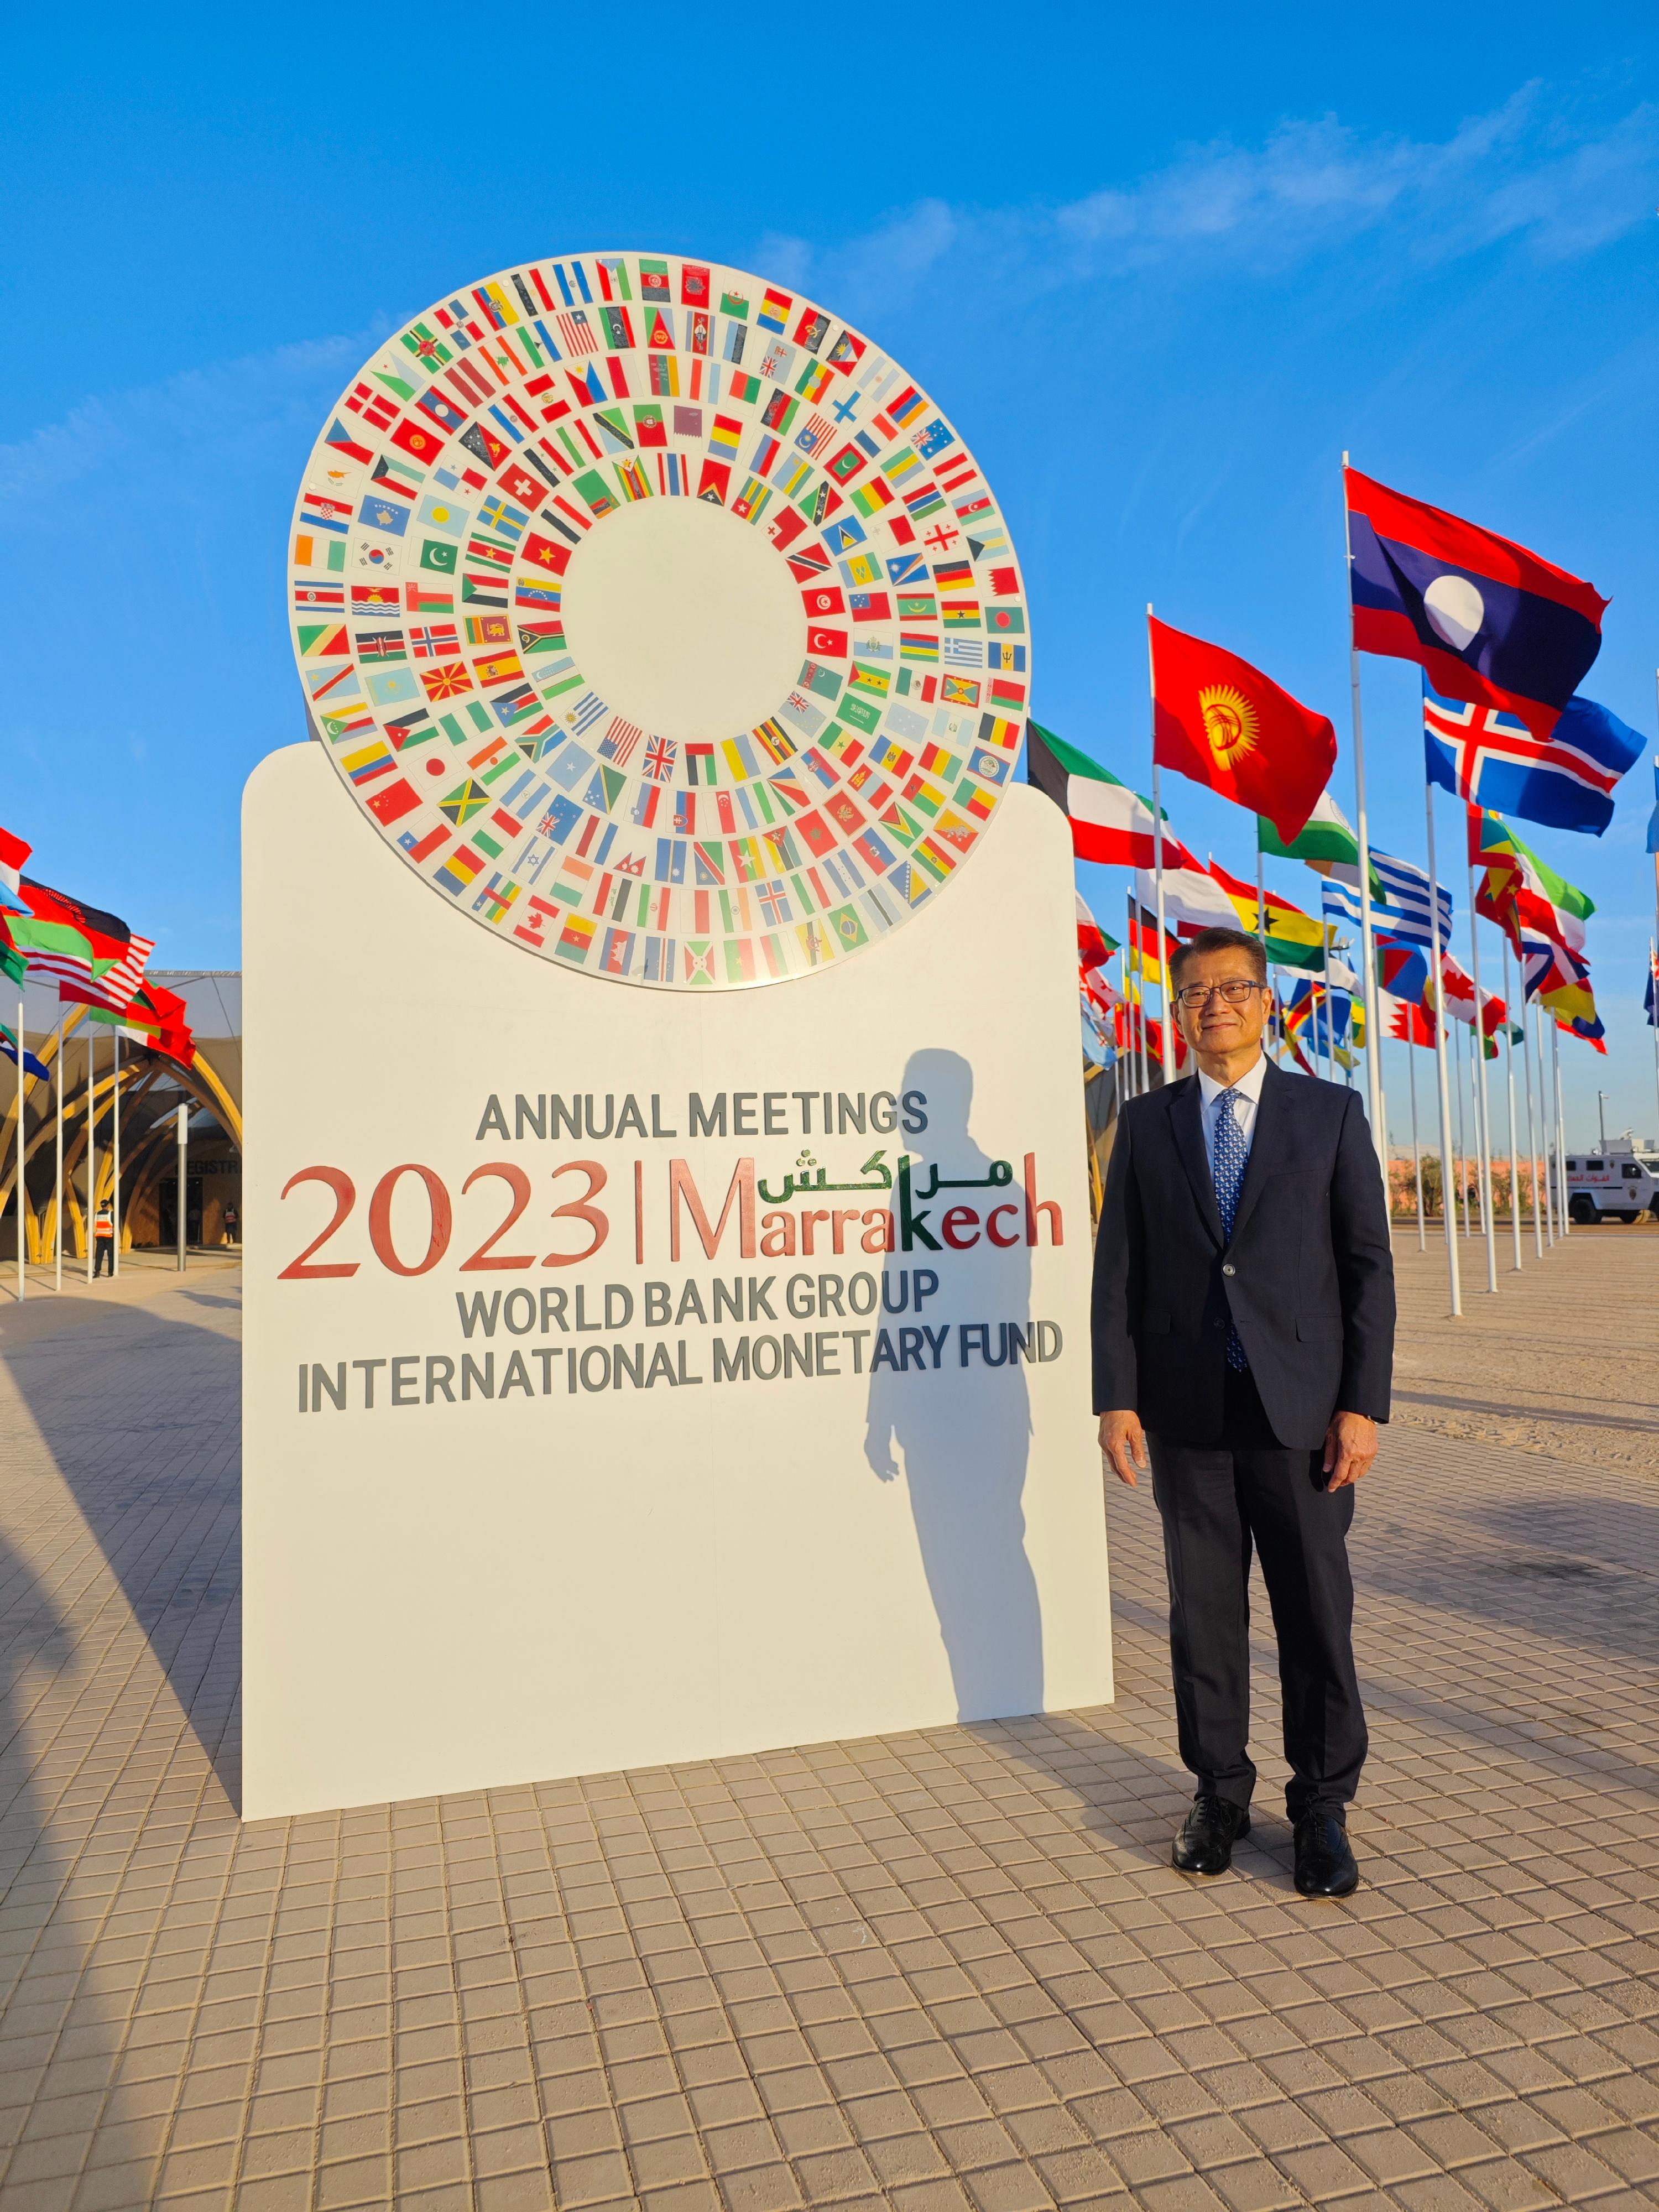 The Financial Secretary, Mr Paul Chan, attended the 2023 Annual Meetings of the International Monetary Fund and the World Bank Group in Marrakech, Morocco, yesterday (October 13, Marrakech time), as a member of the Chinese delegation.